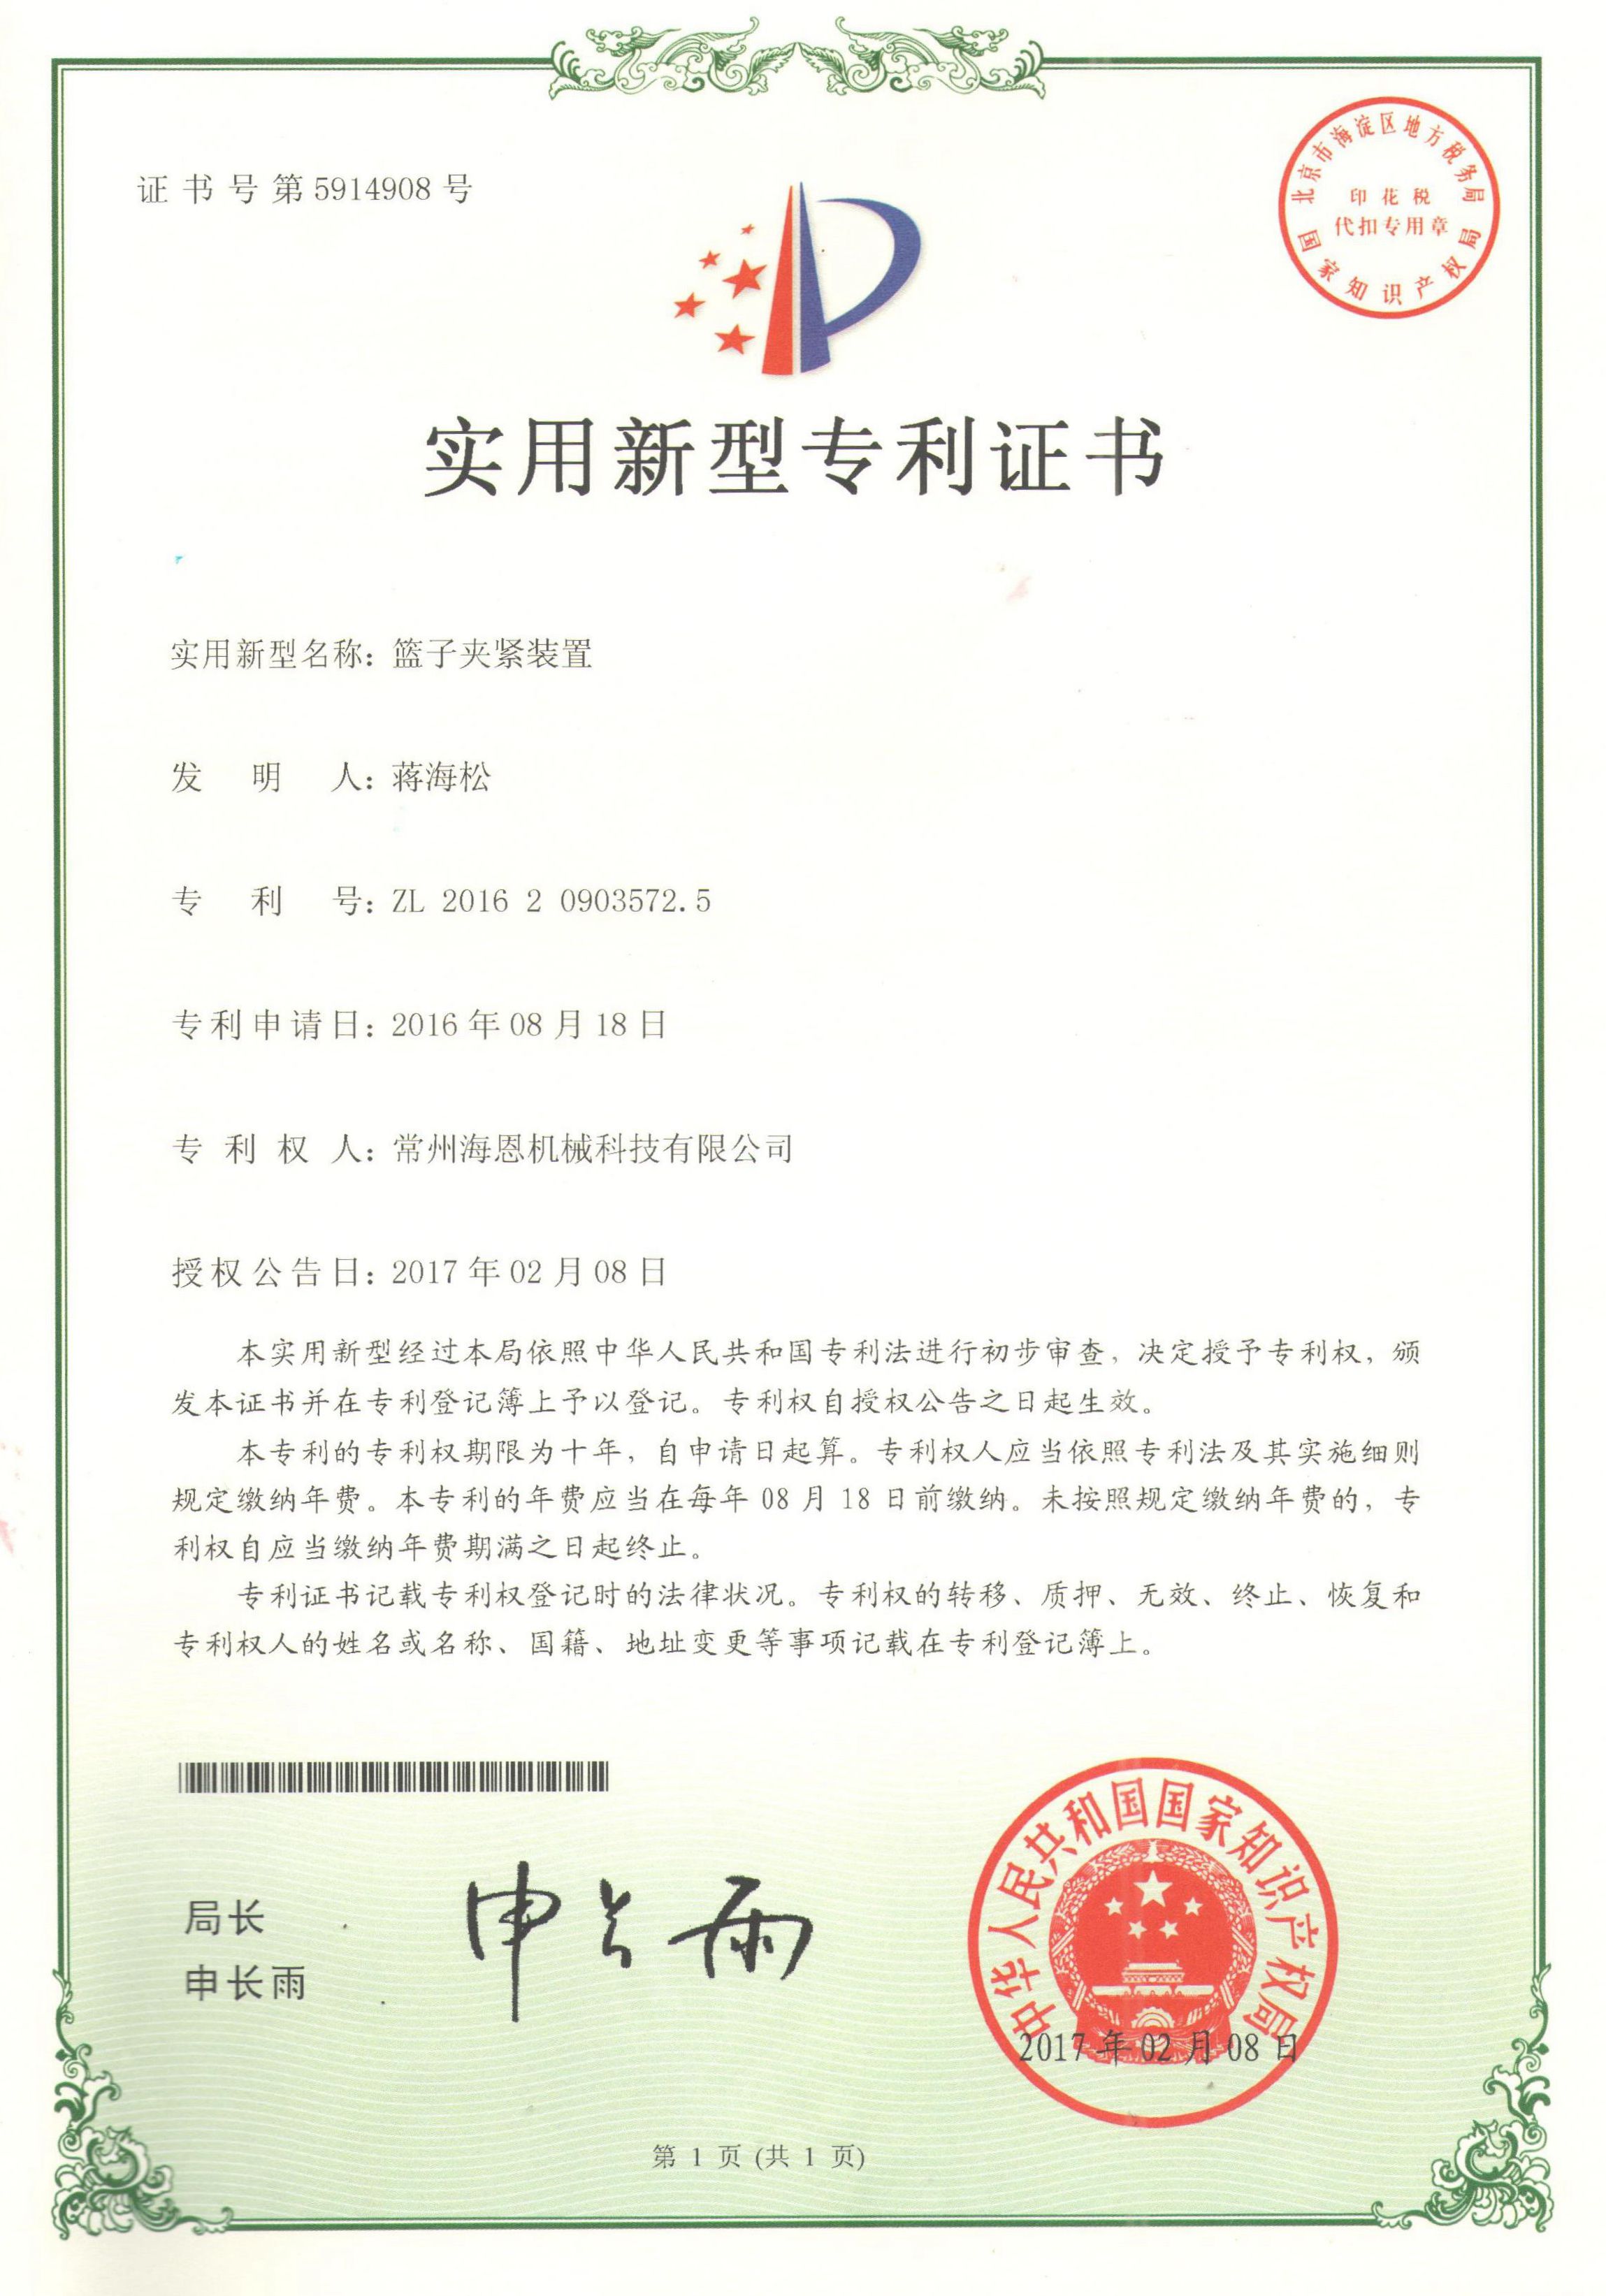 Congratulations Hyon Machinery Technology obtained the "patent for utility models" certificate